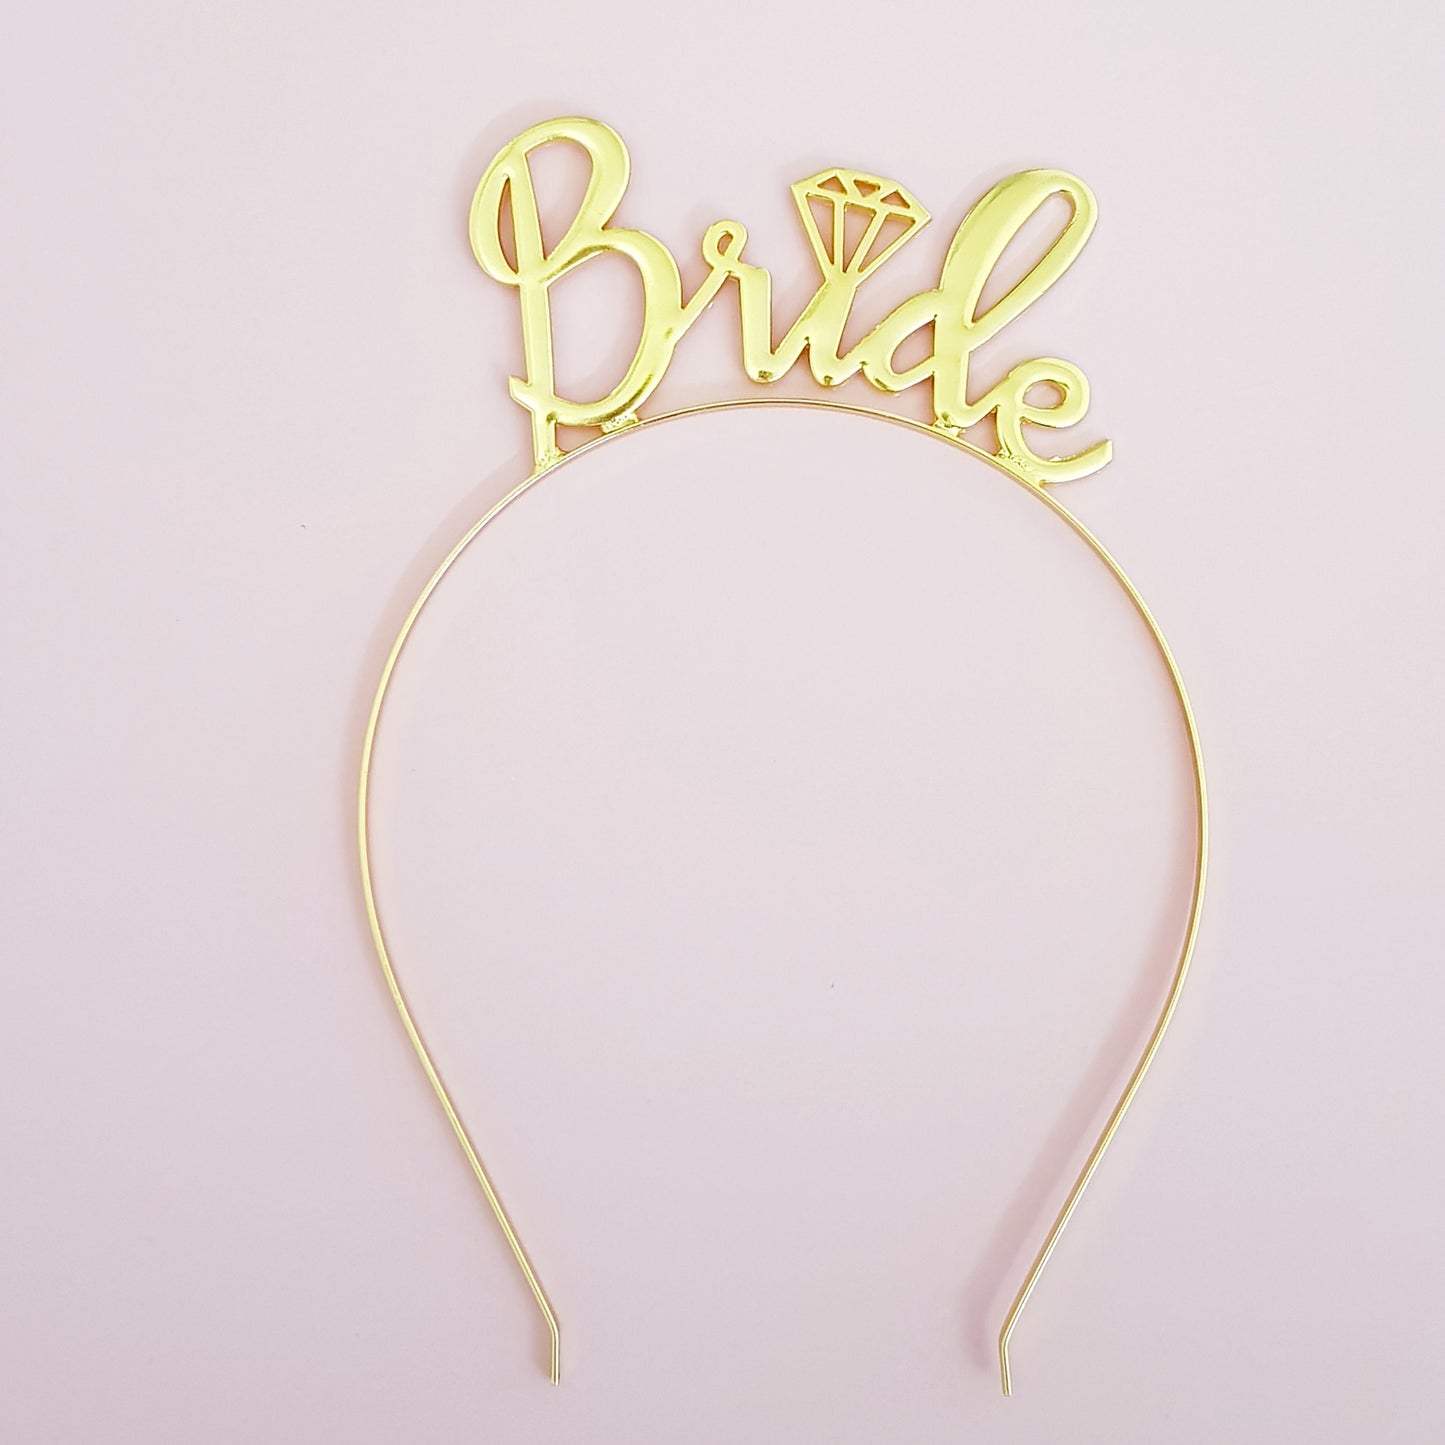 Bride hair band in Gold